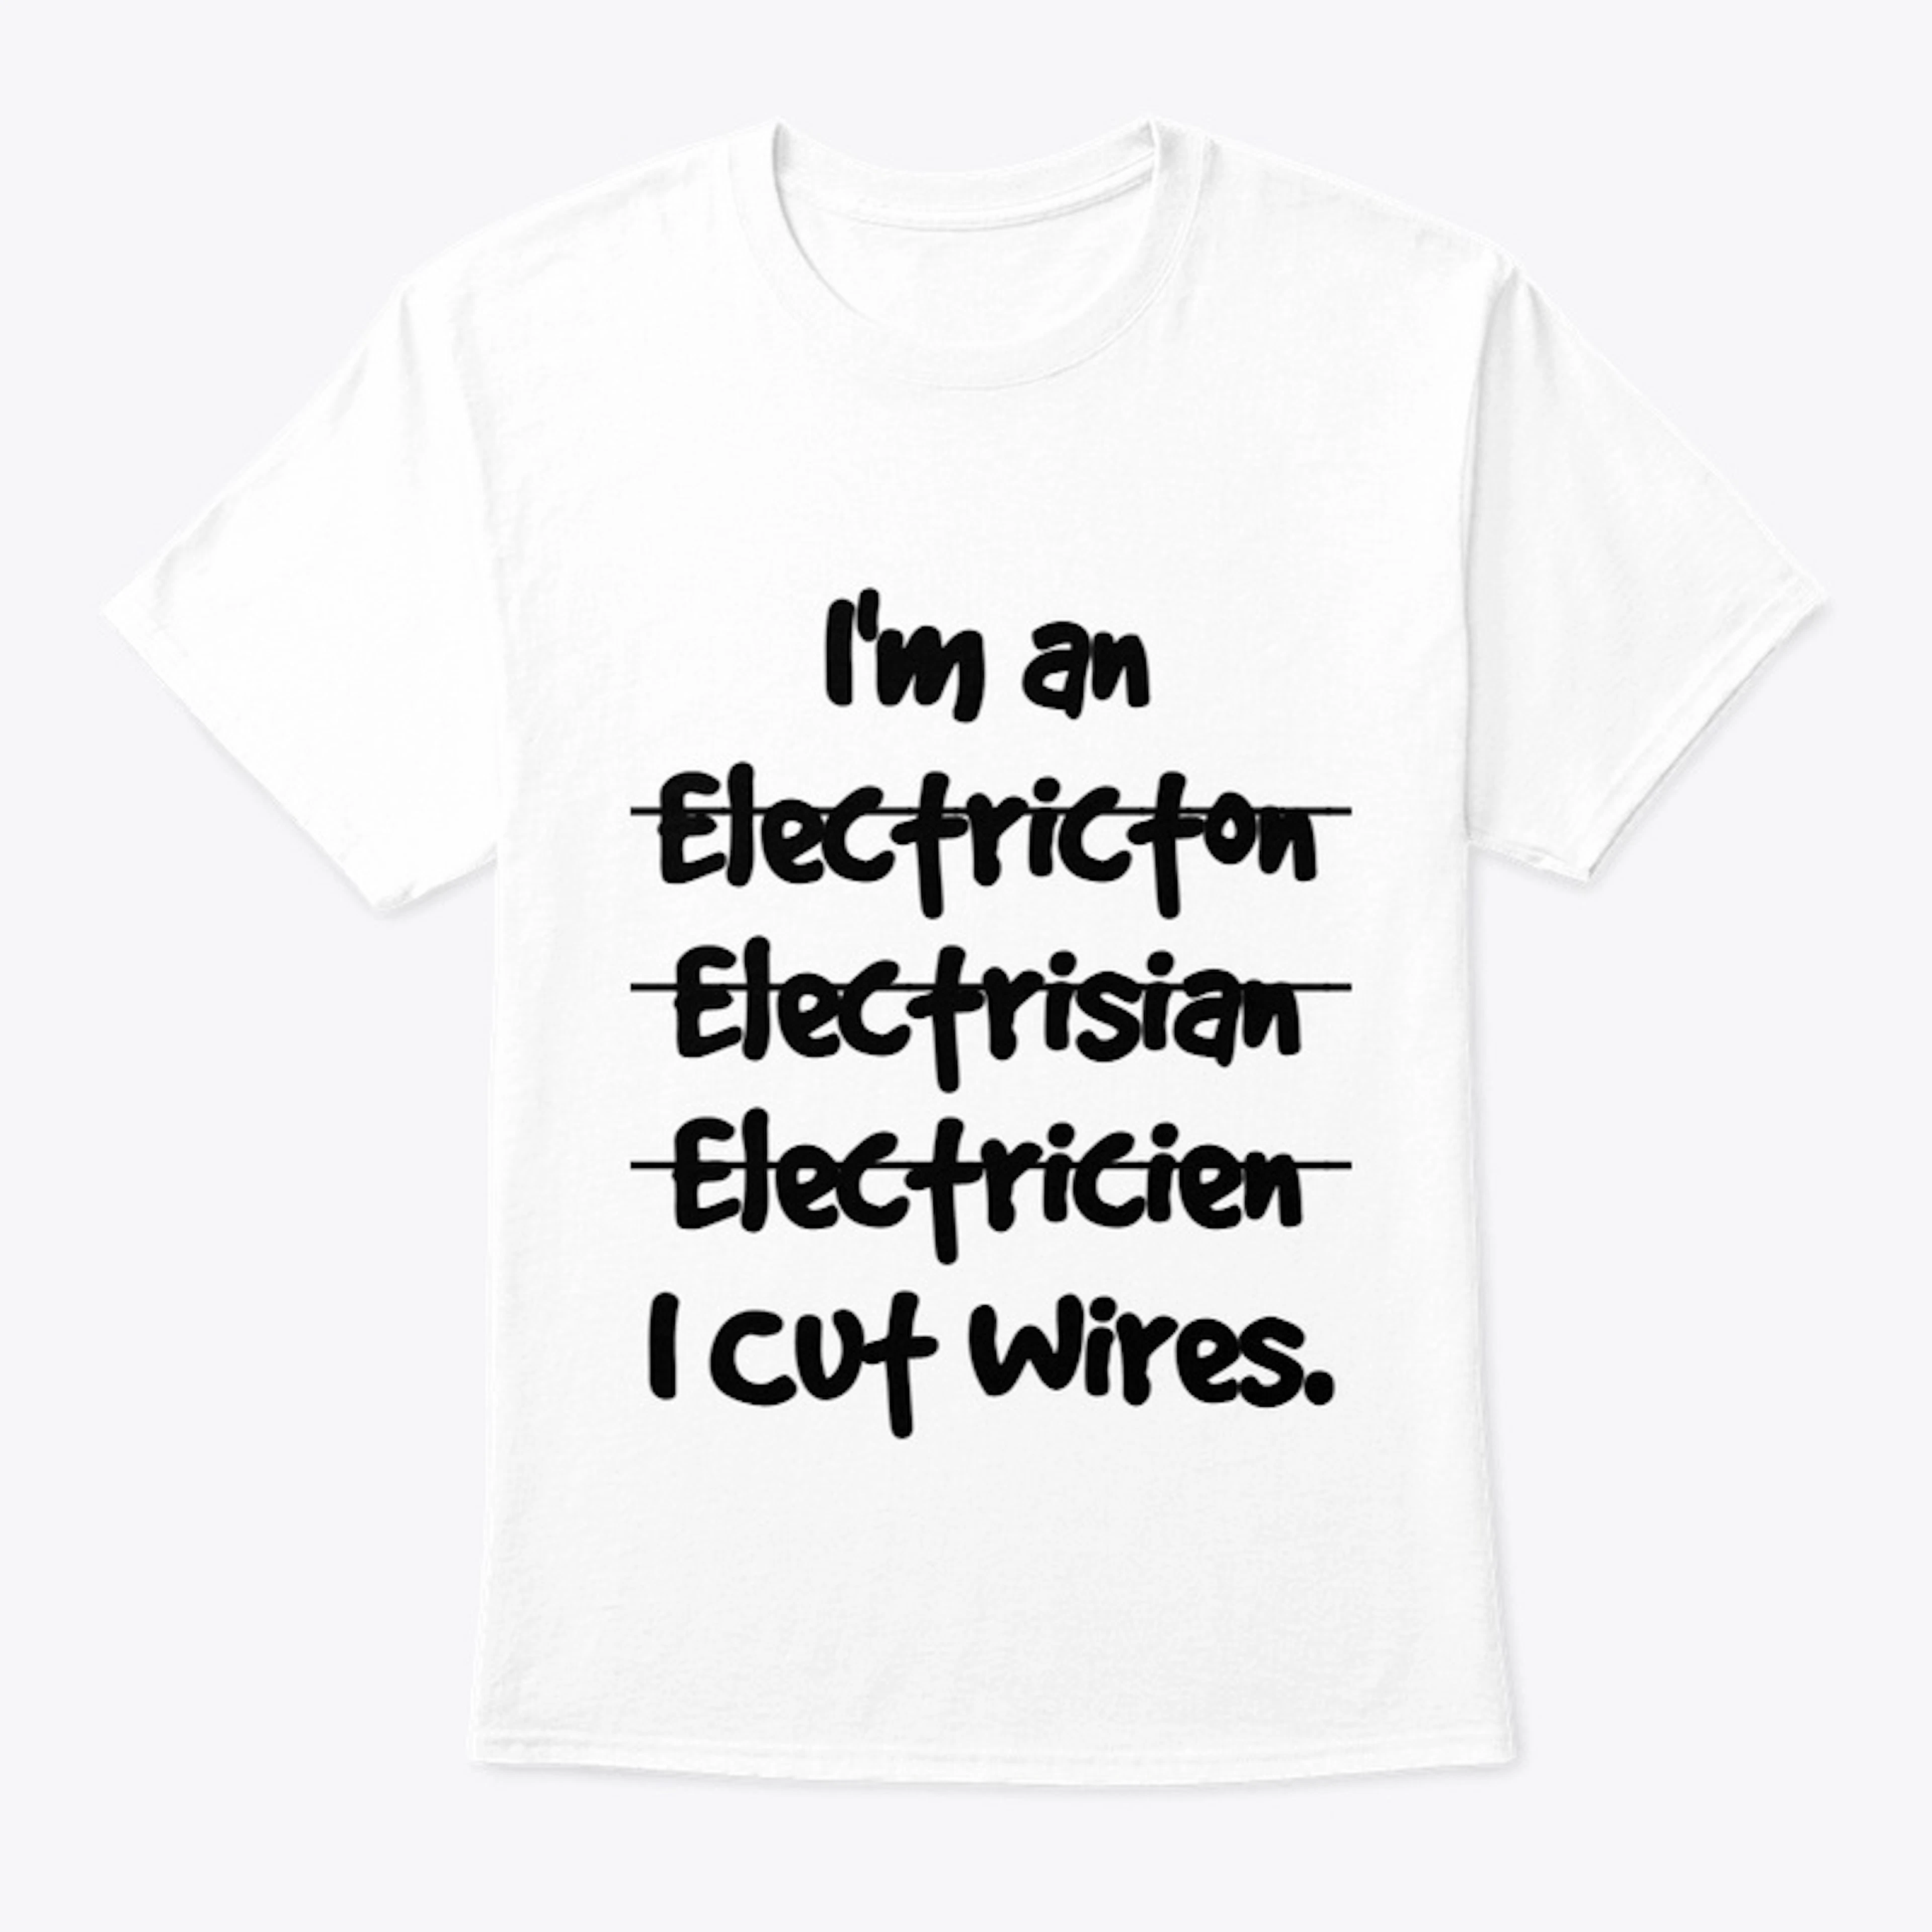 I Cut Wires Shirt for Electrician